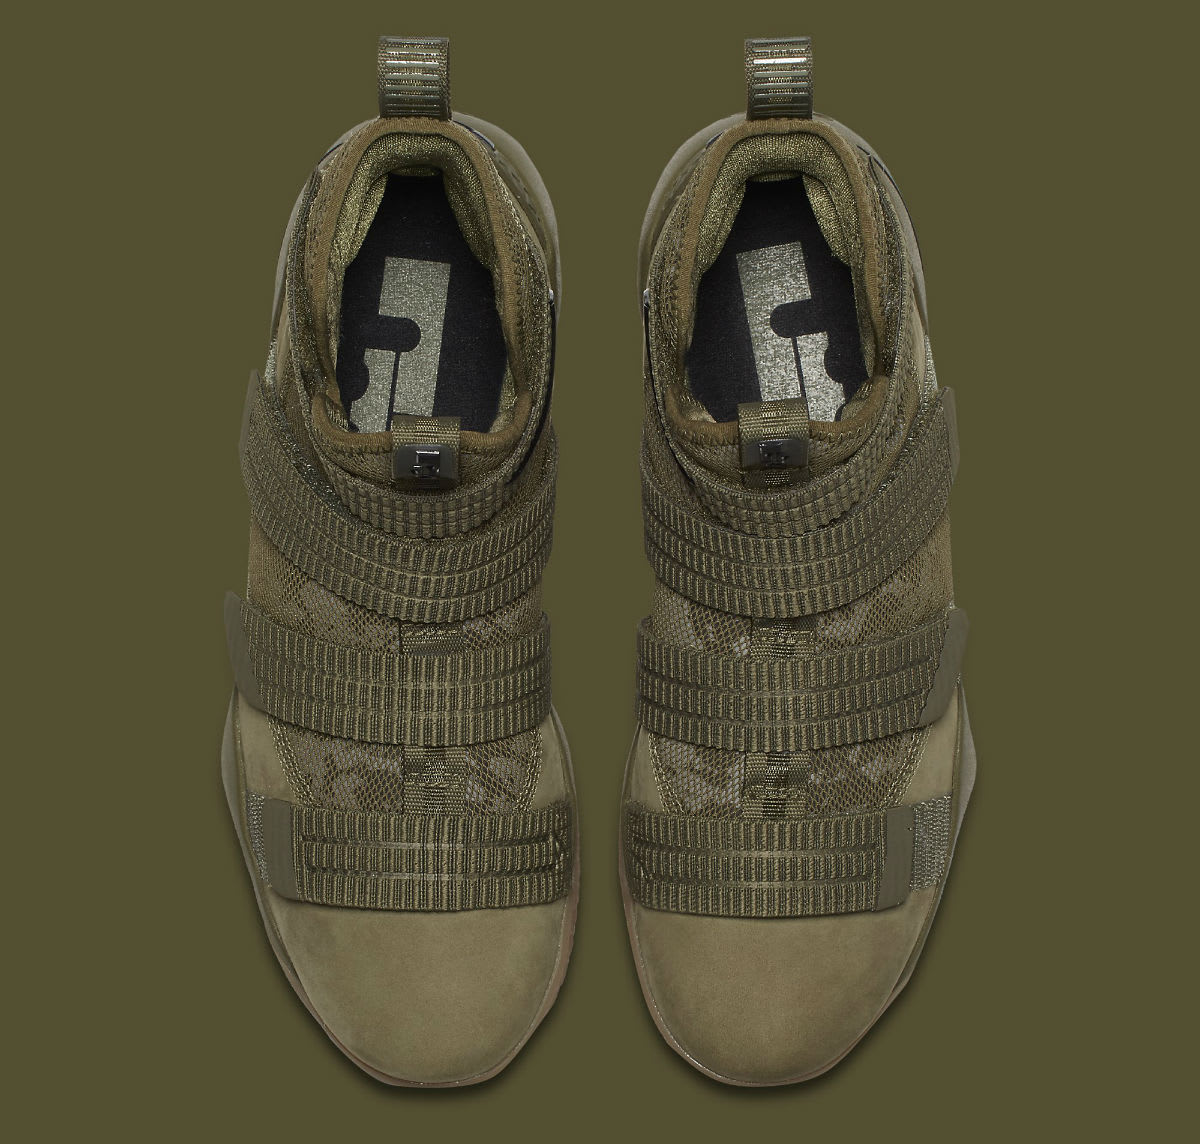 Nike LeBron Soldier 11 SFG Olive Release Date Top 897646-200